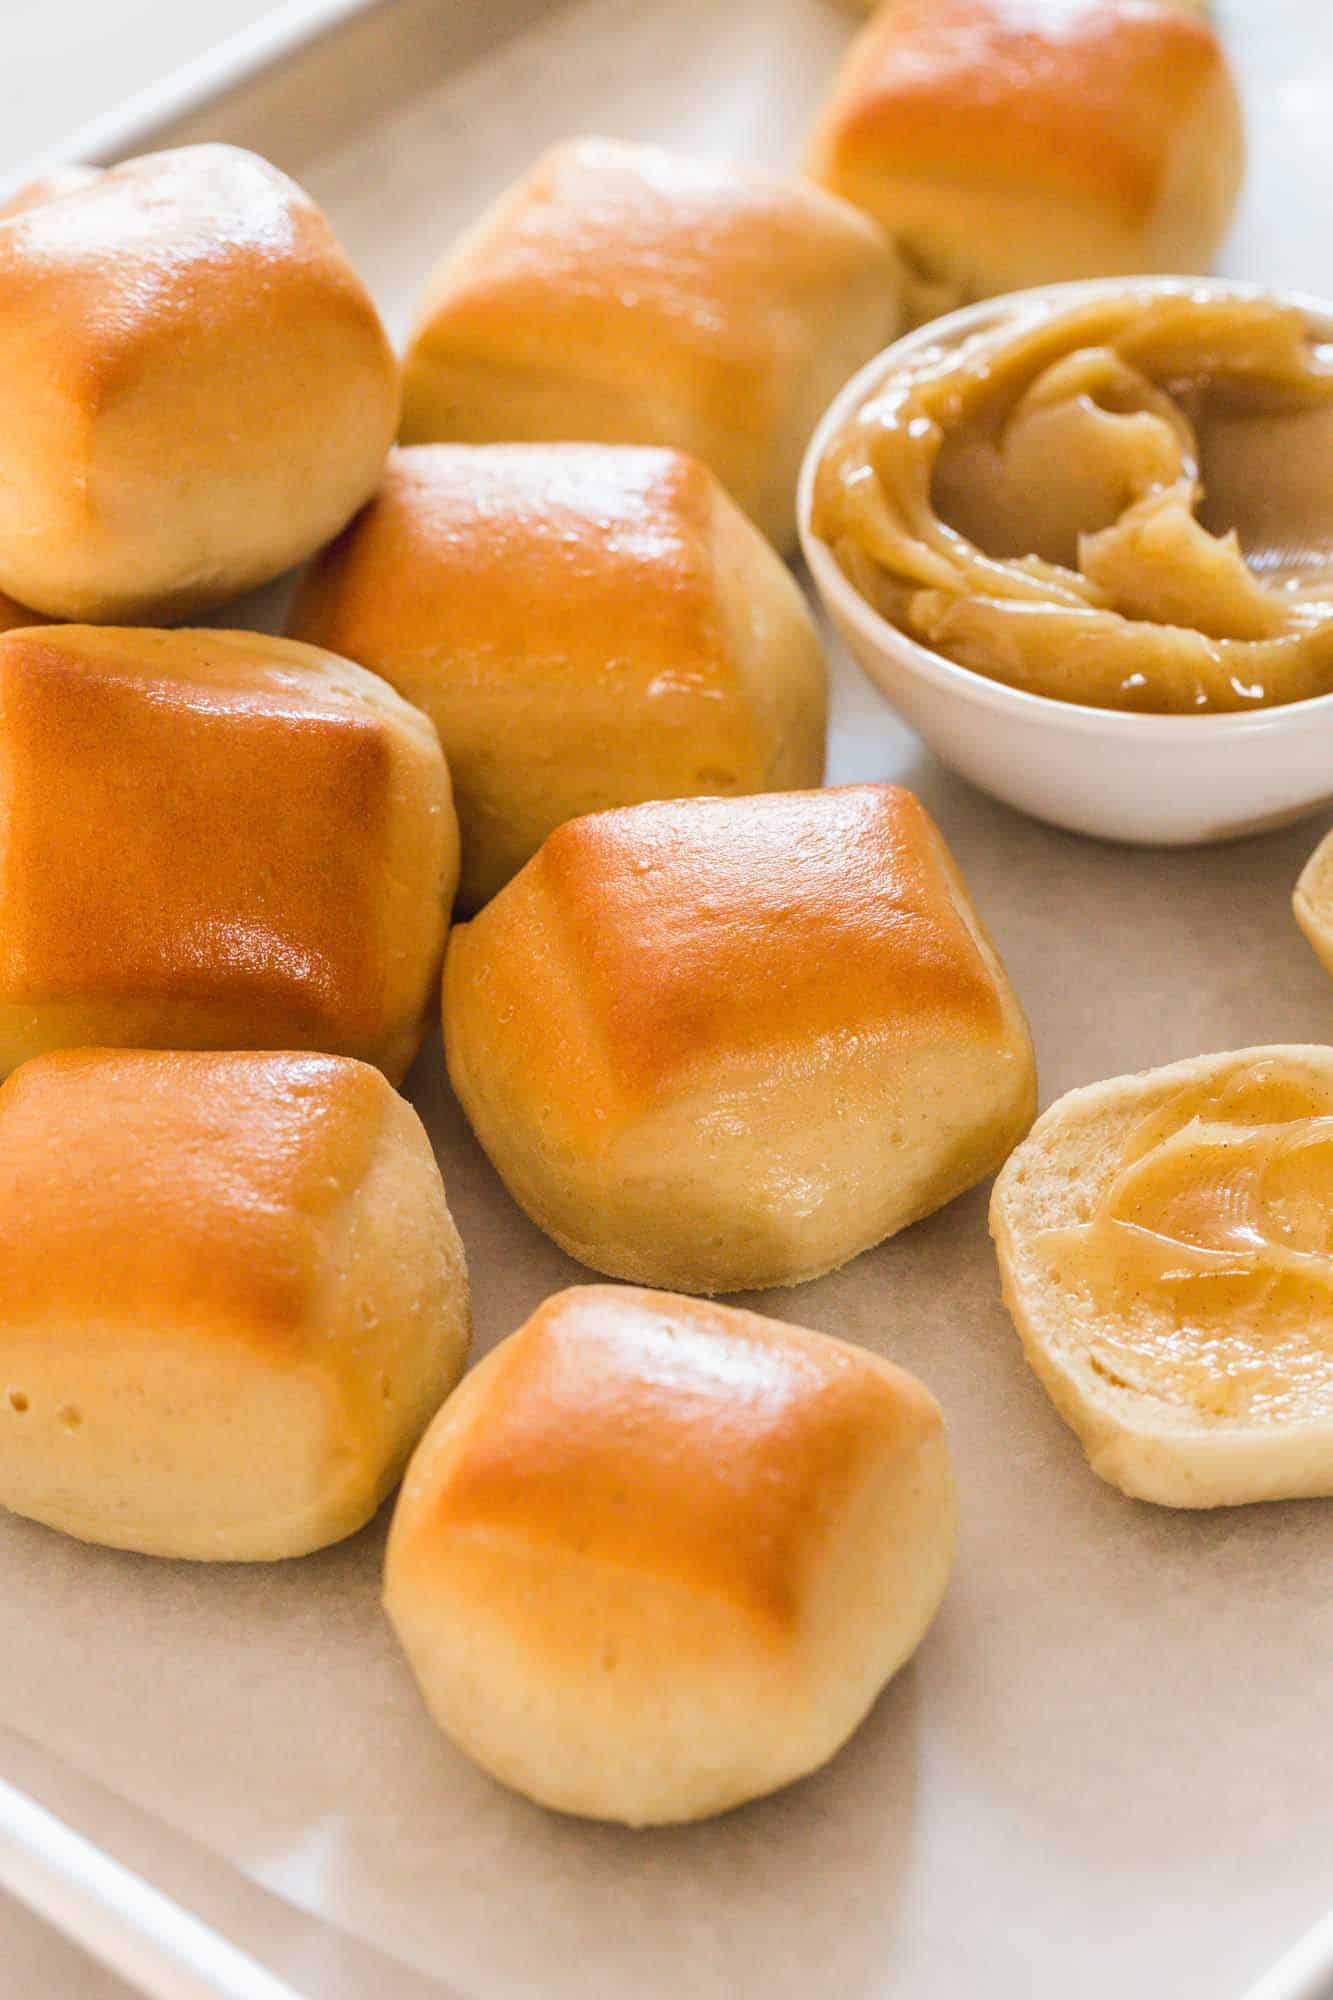 A few Texas roadhouse rolls served with cinnamon honey butter on the side